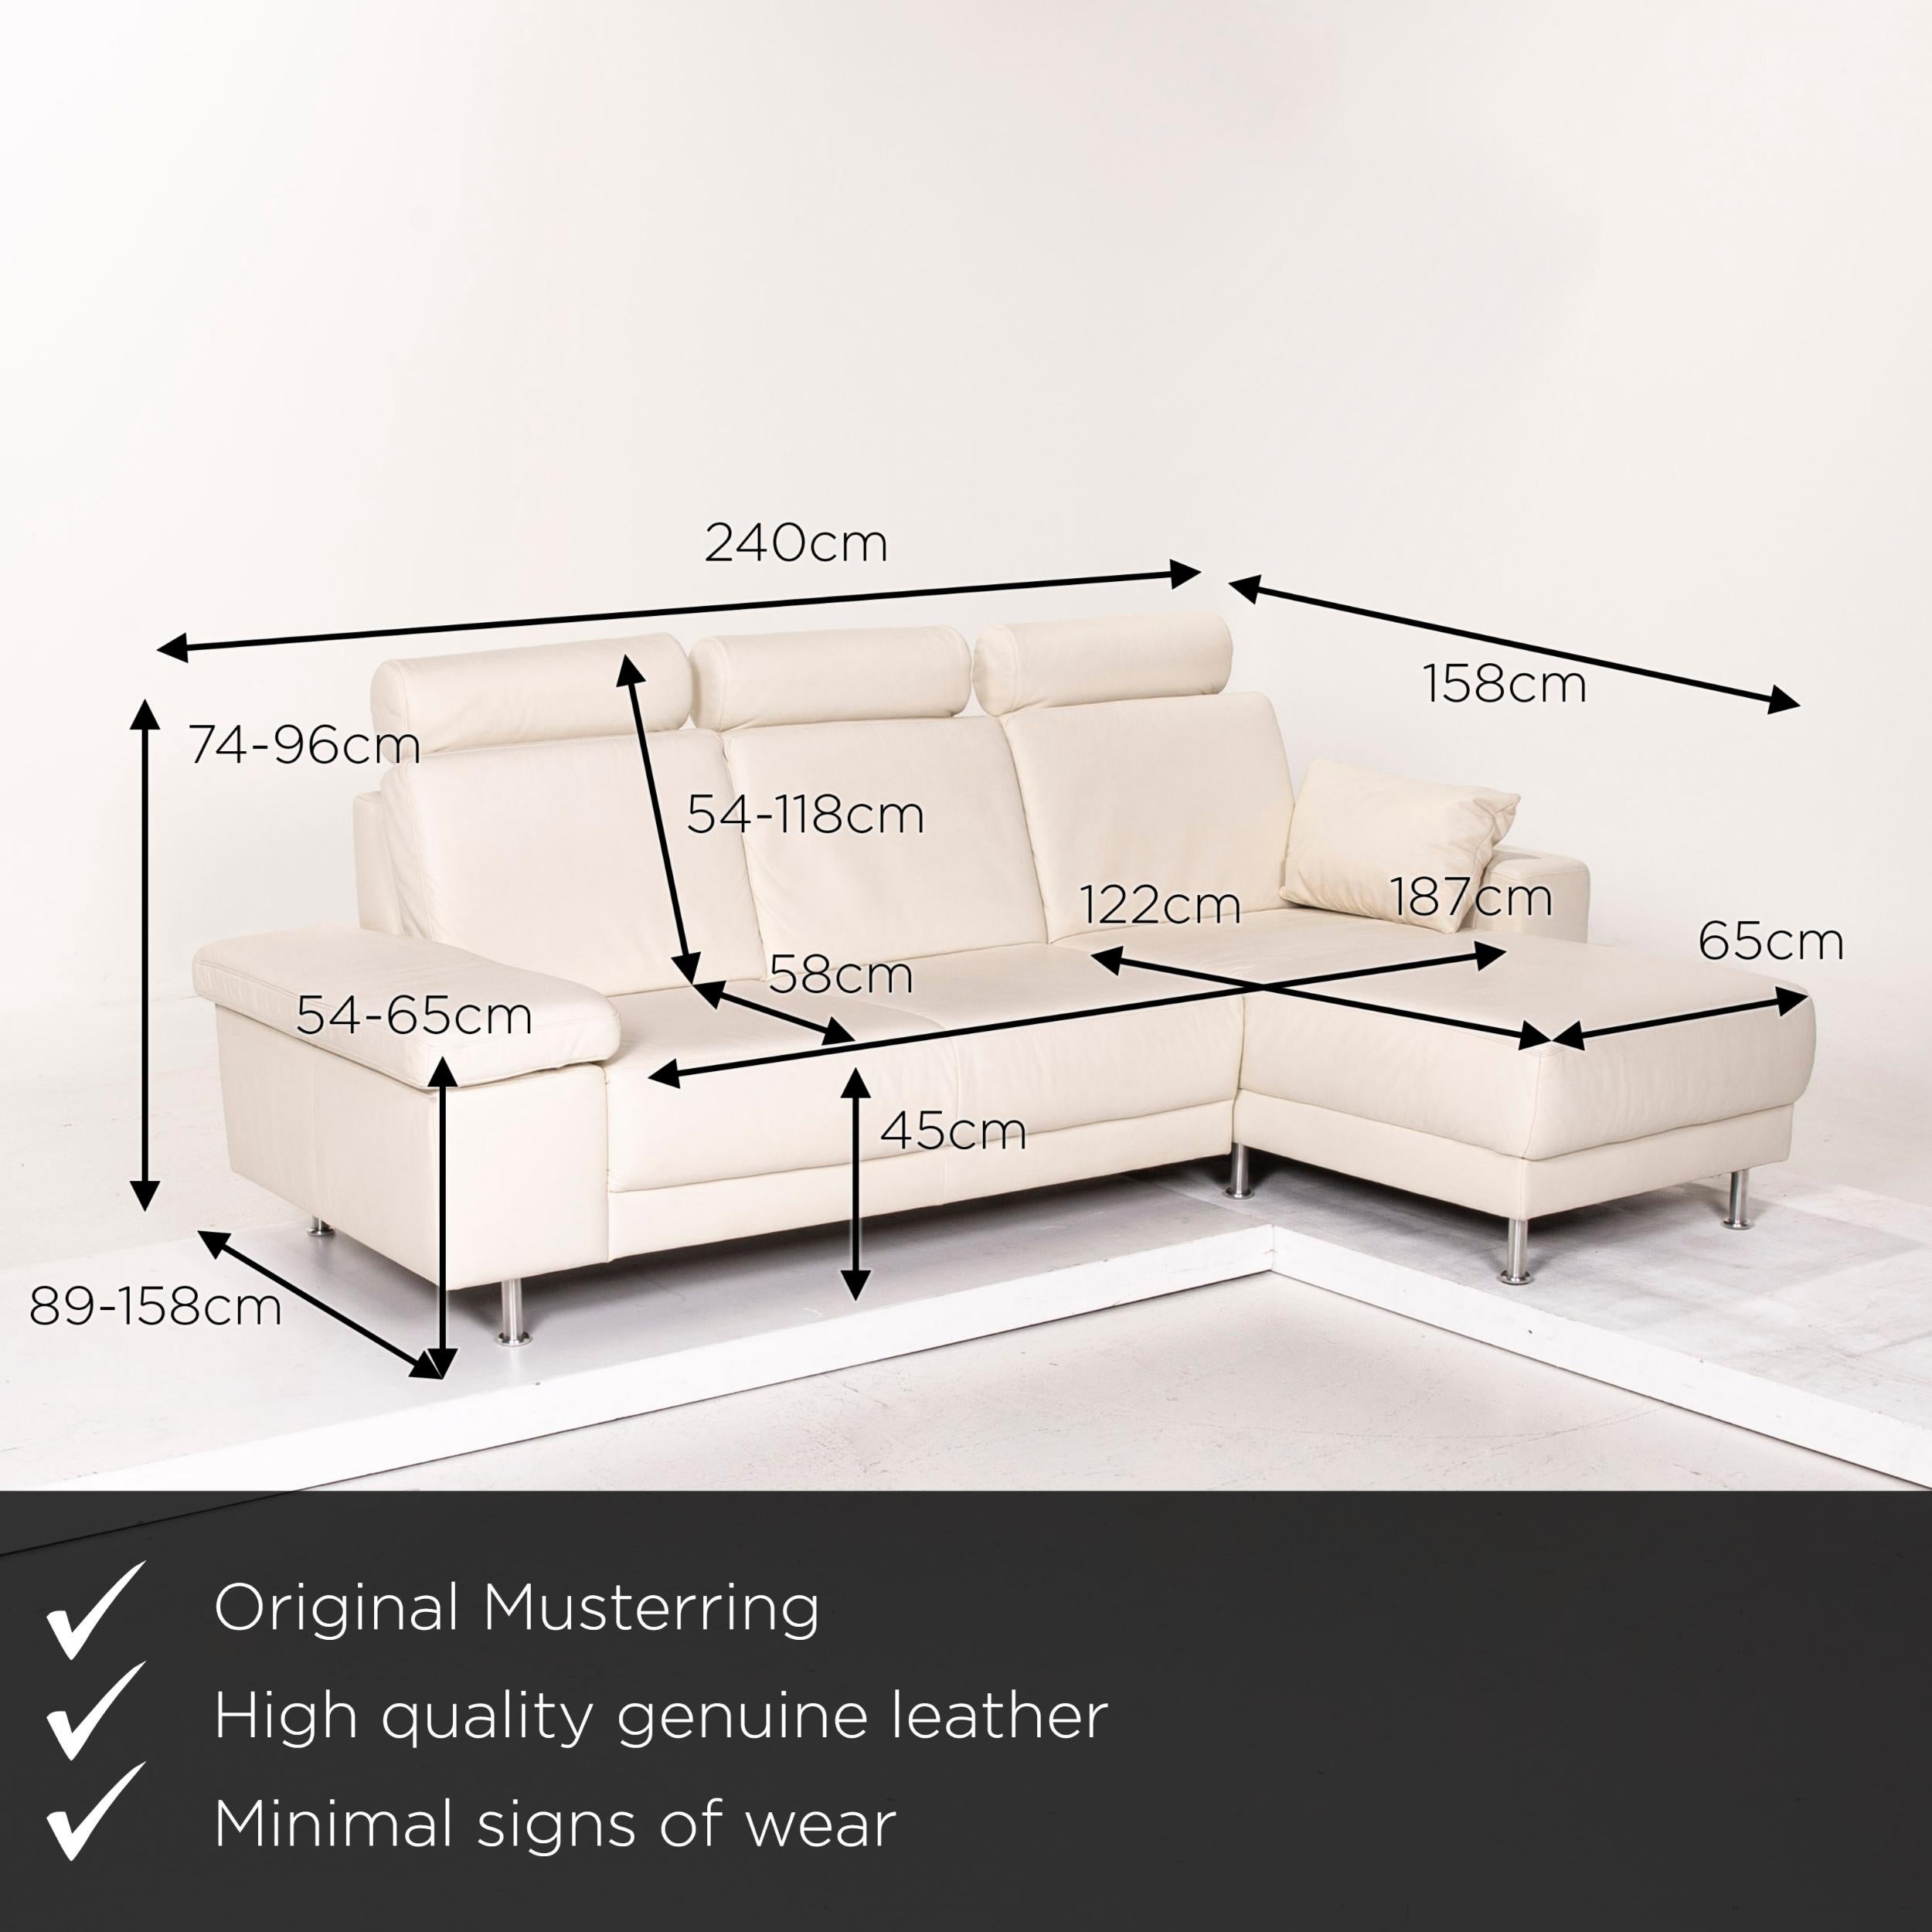 We present to you a Musterring leather corner sofa white function sofa couch.

 

 Product measurements in centimeters:
 

Depth 89
Width 240
Height 74
Seat height 45
Rest height 54
Seat depth 58
Seat width 187
Back height 54.